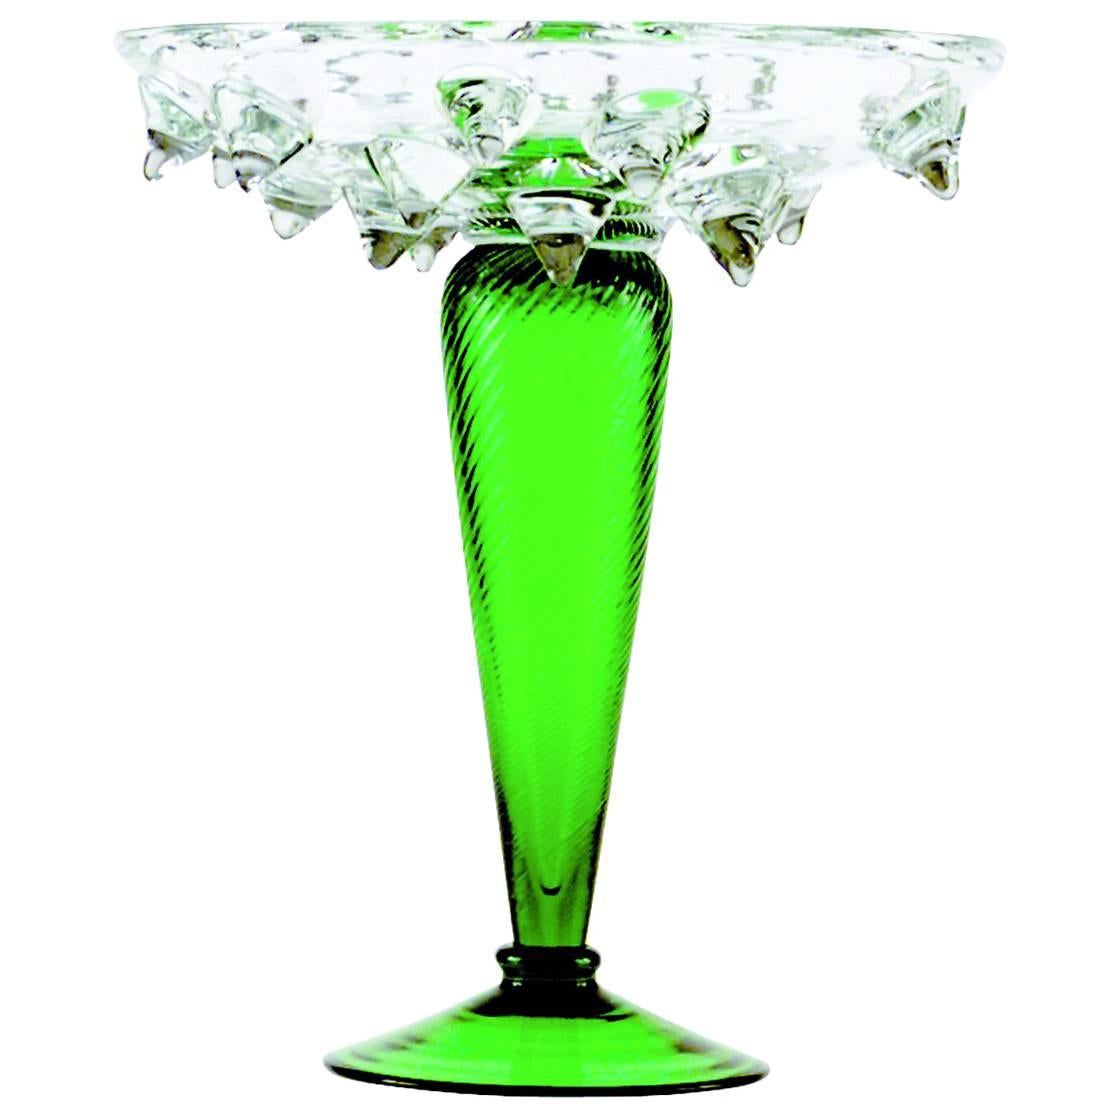 Tristano Medium Glass Fruit Stand with Green Base by Borek Sipek for Driade